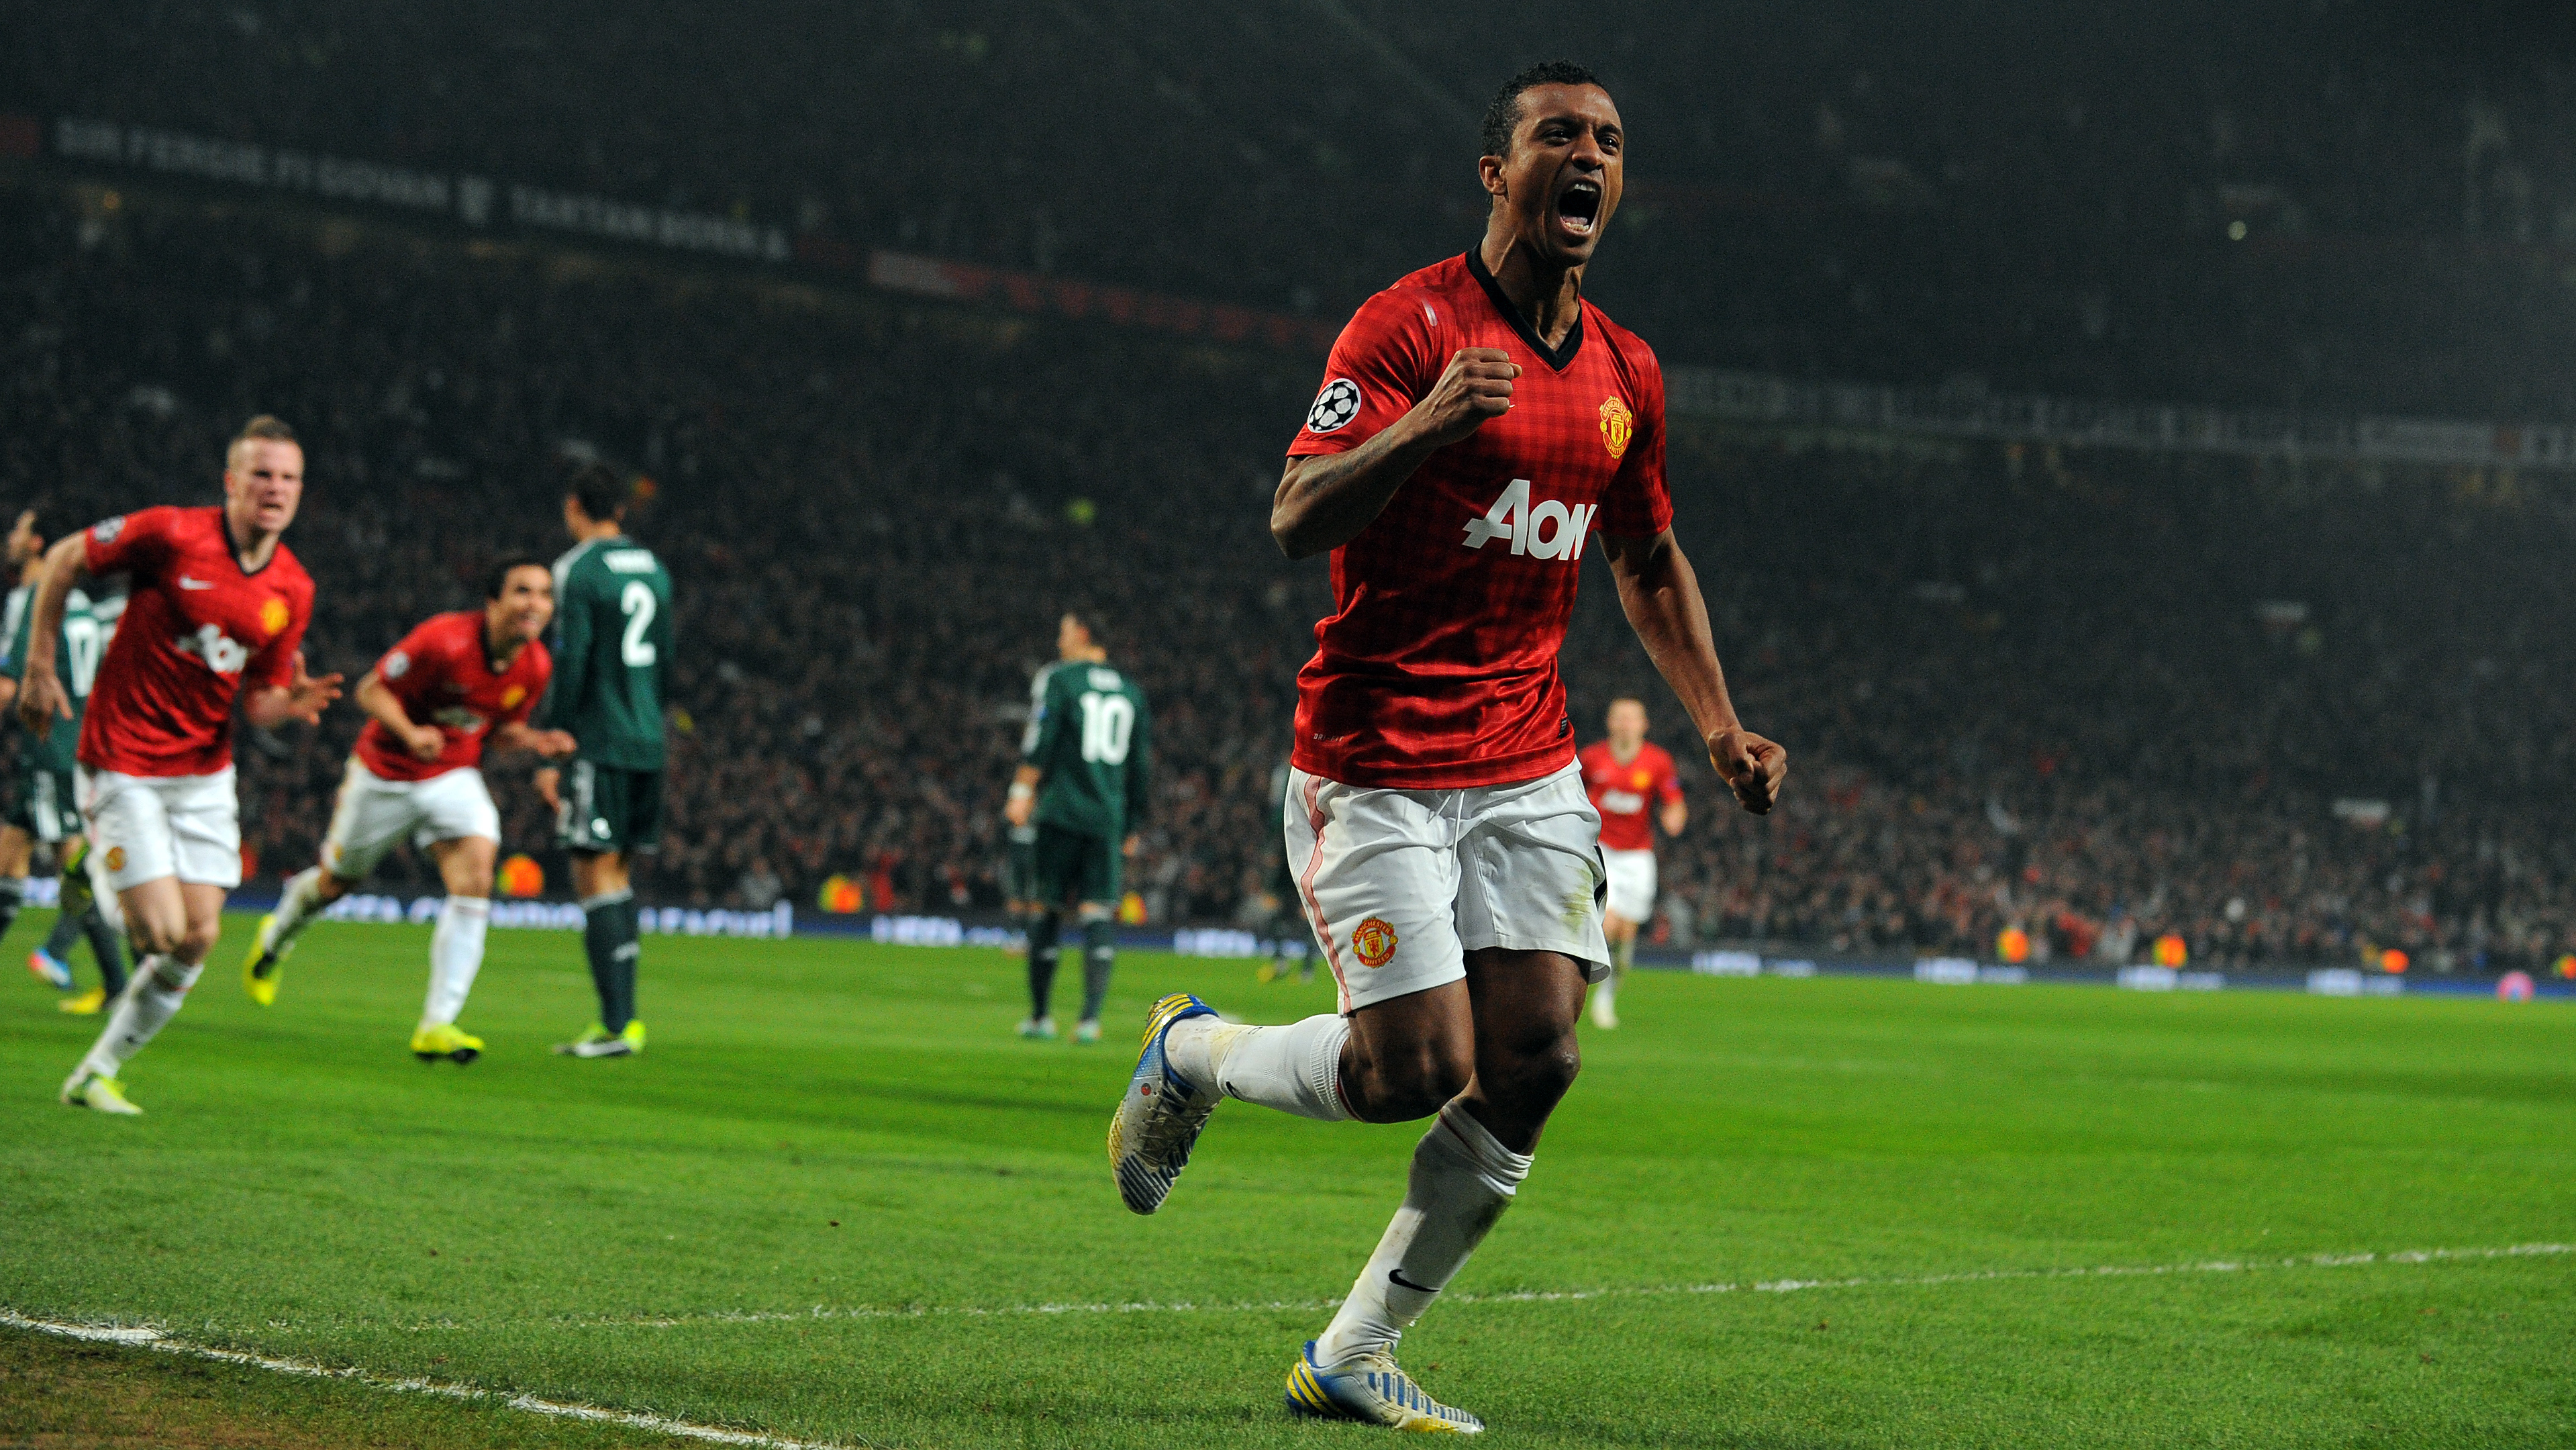 Manchester United's Portuguese midfielder Nani celebrates after Real Madrid's Spanish defender Sergio Ramos (unseen) scored an own goal during the UEFA Champions League round of 16 second leg football match between Manchester United and Real Madrid at Old Trafford in Manchester, northwest England on March 5, 2013. AFP PHOTO / ANDREW YATES        (Photo credit should read ANDREW YATES/AFP/Getty Images)